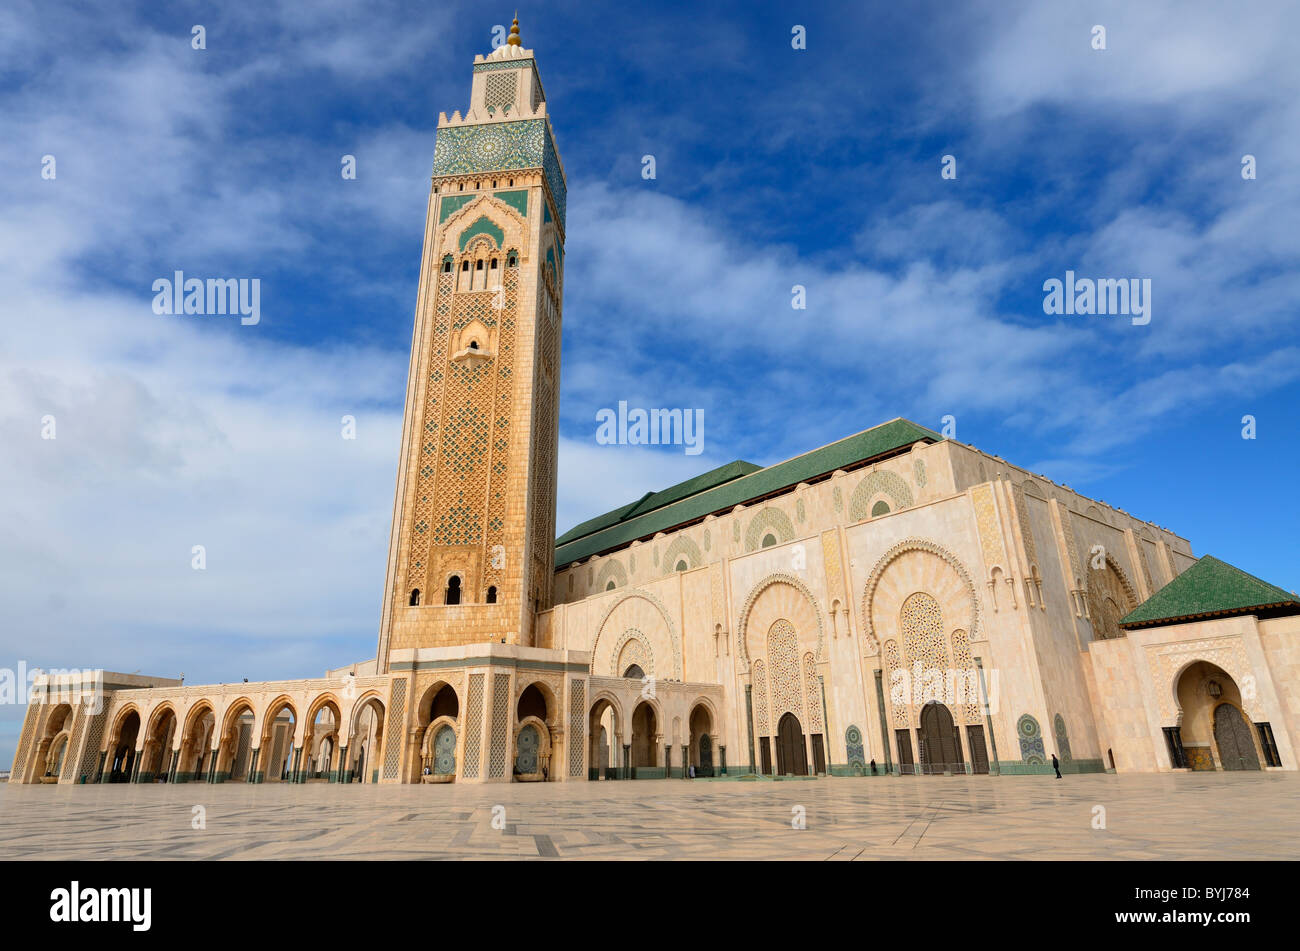 Wide angle view of Hassan II Mosque Muslim place of worship in Casablanca Morocco Stock Photo